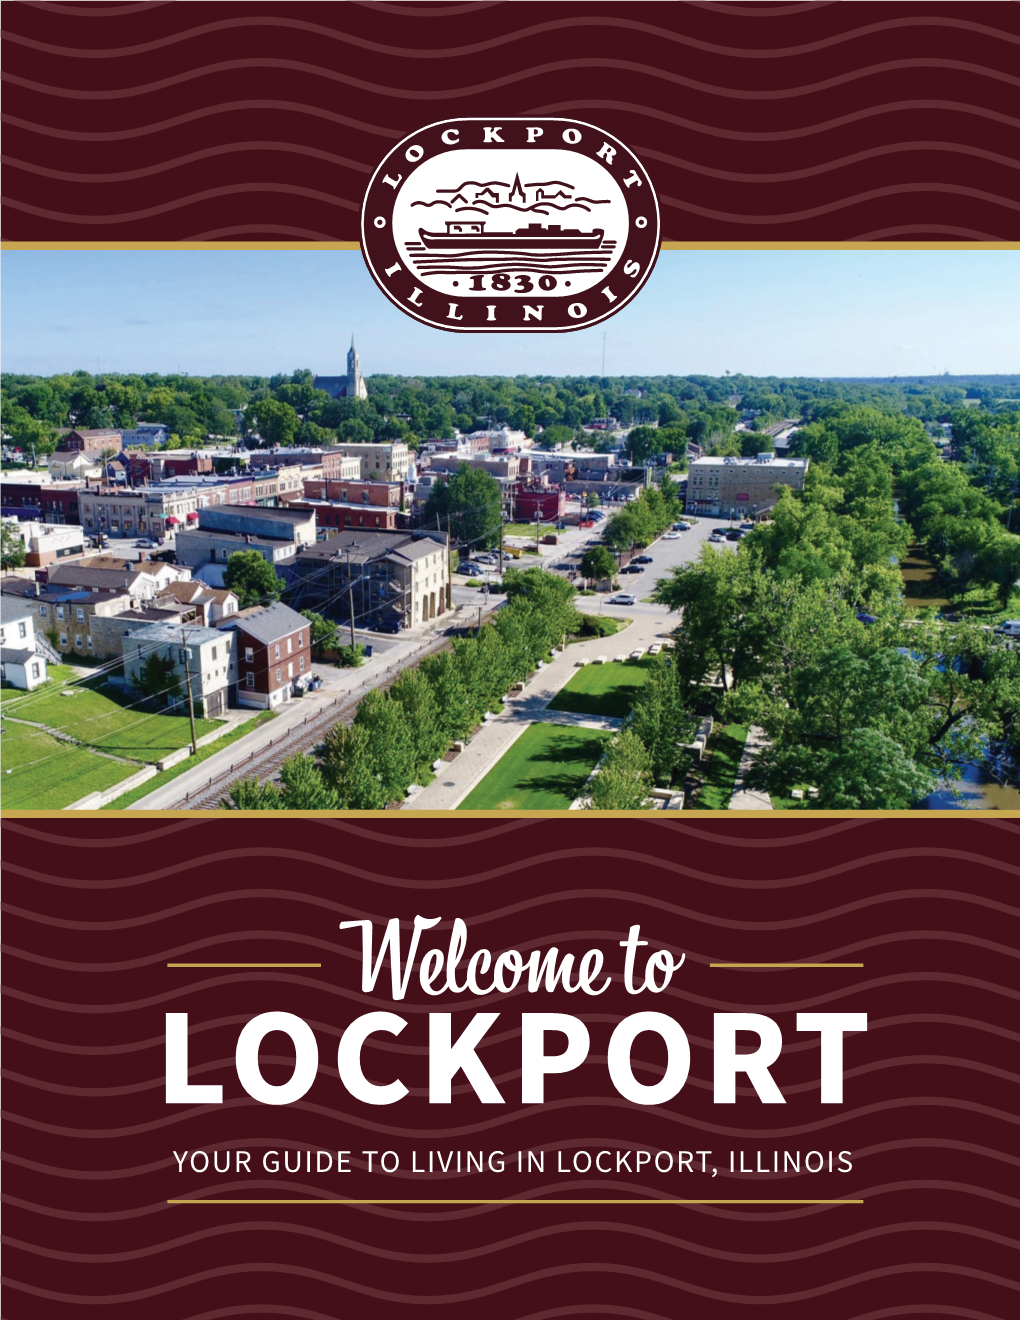 Your Guide to Living in Lockport, Illinois